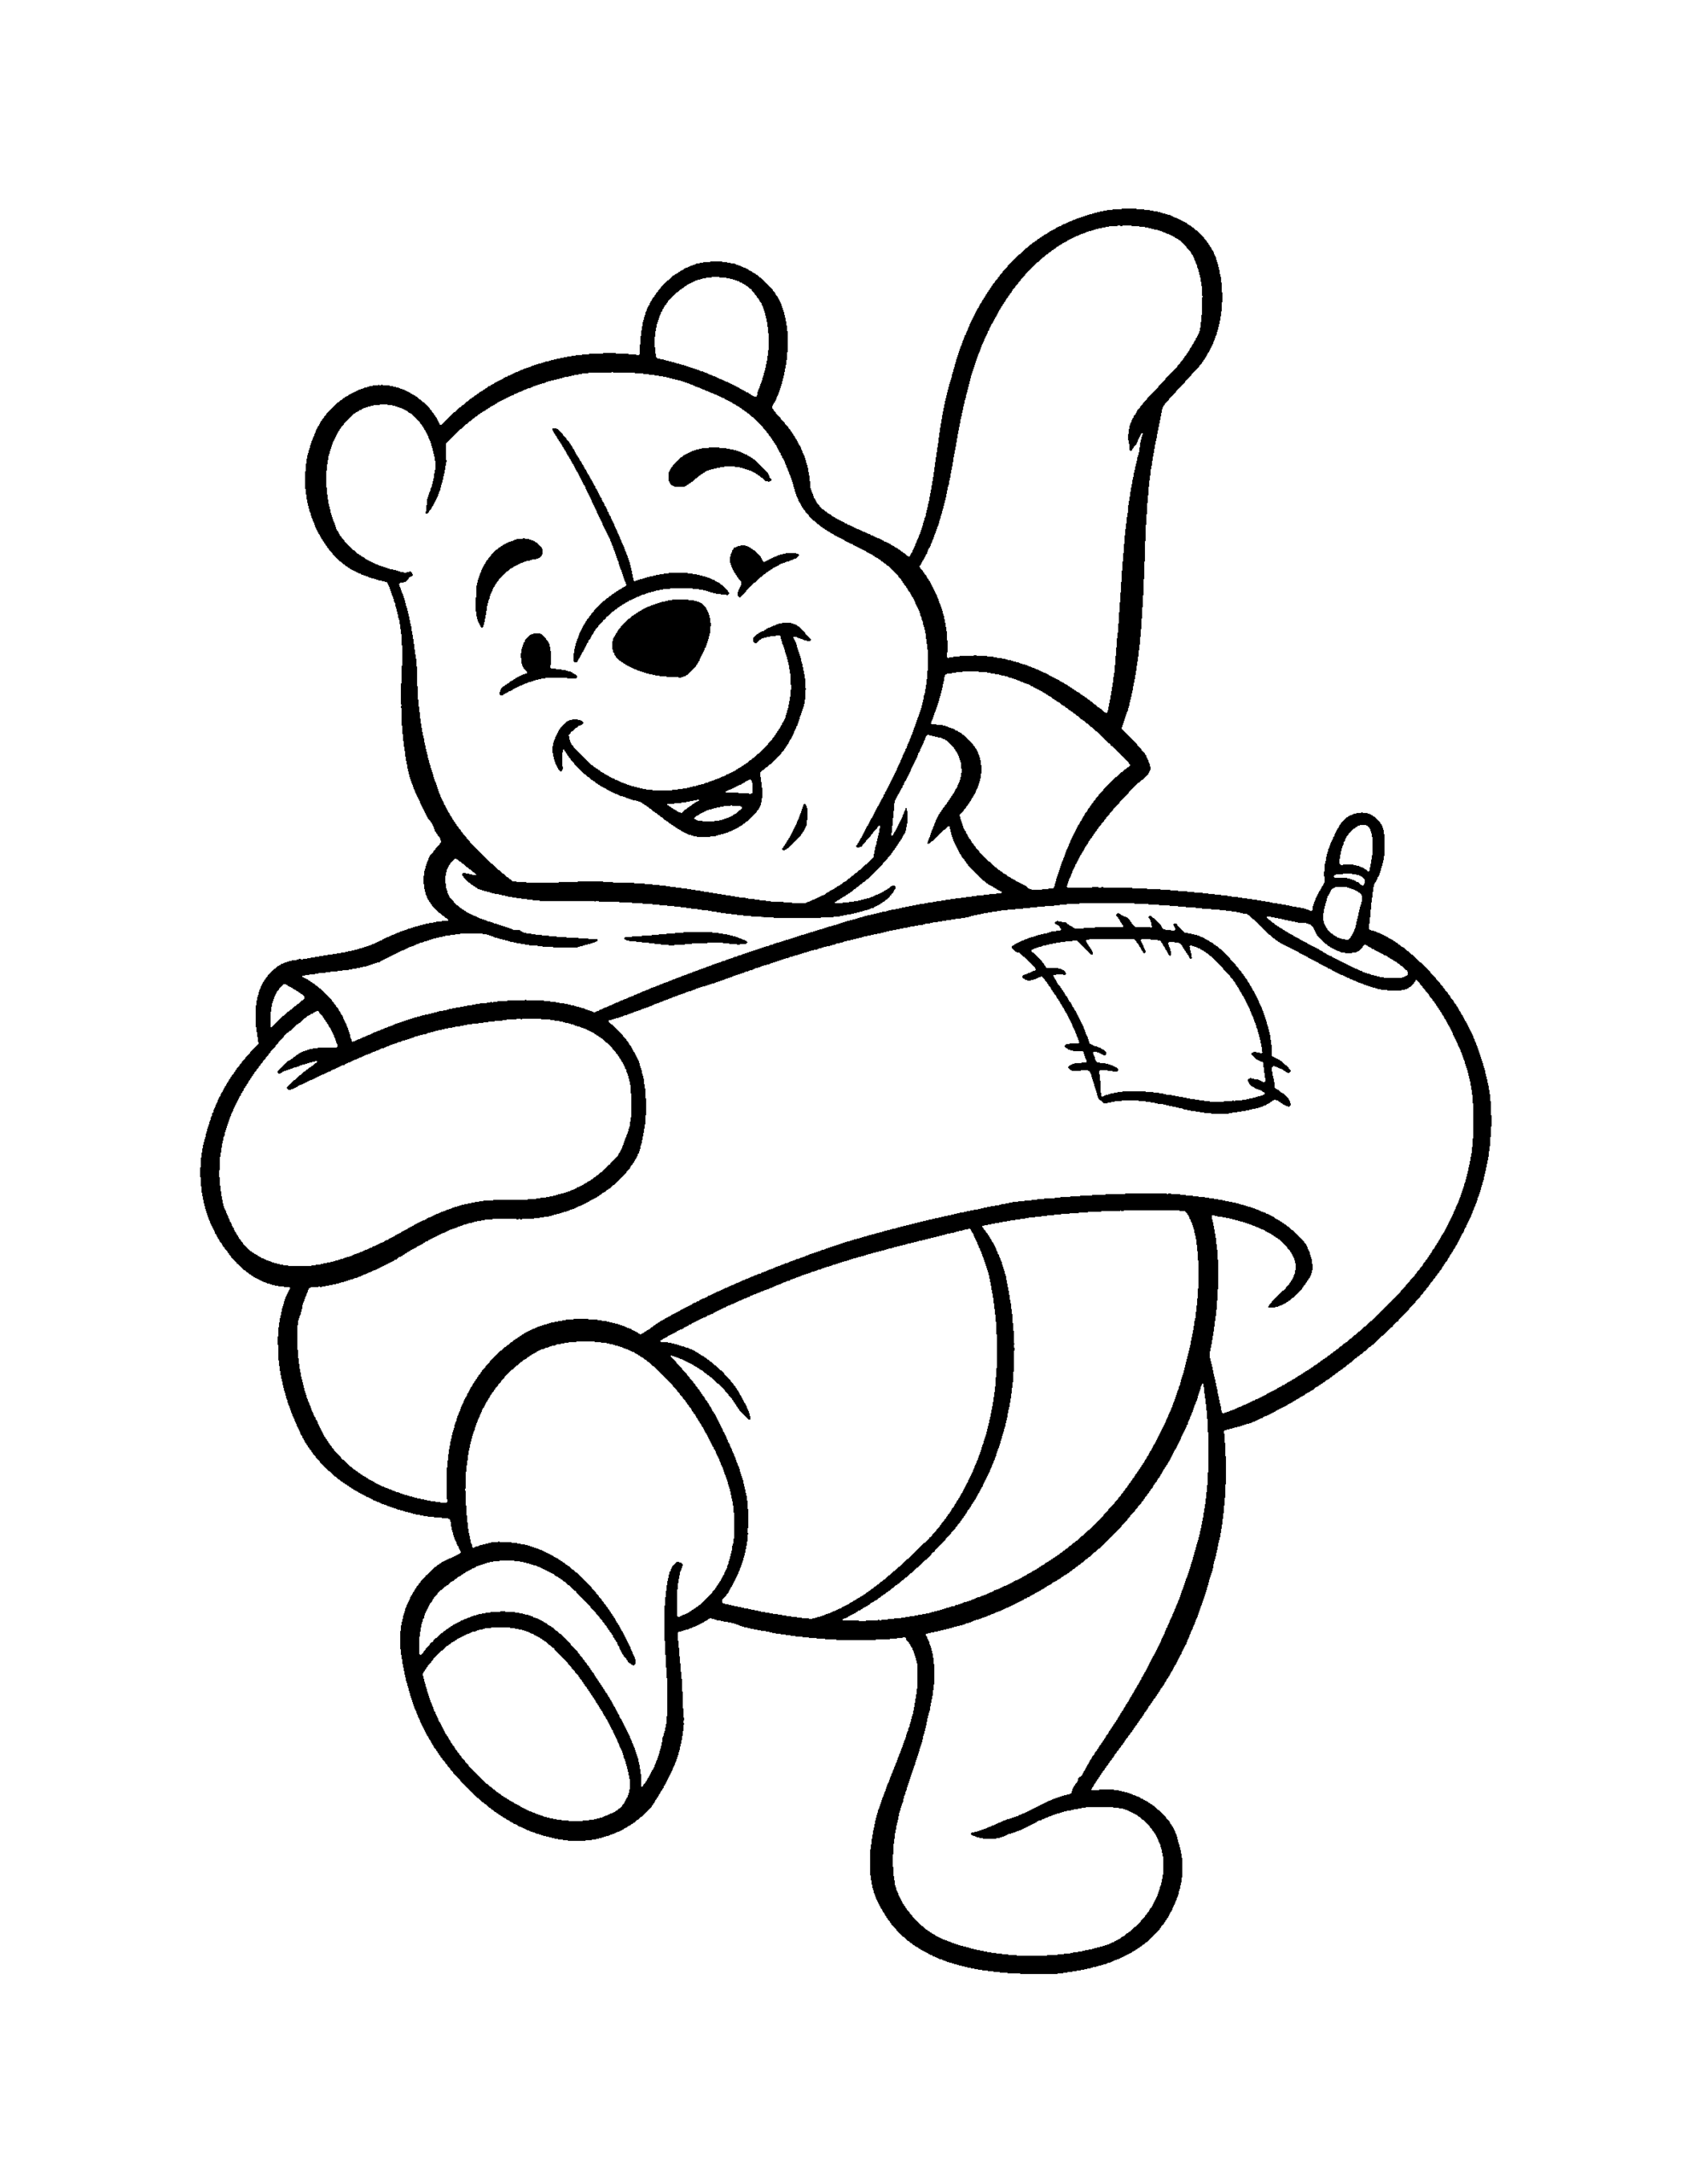 Winnie the Pooh Coloring Pages Cartoons winnie the pooh 85 Printable 2020 7206 Coloring4free